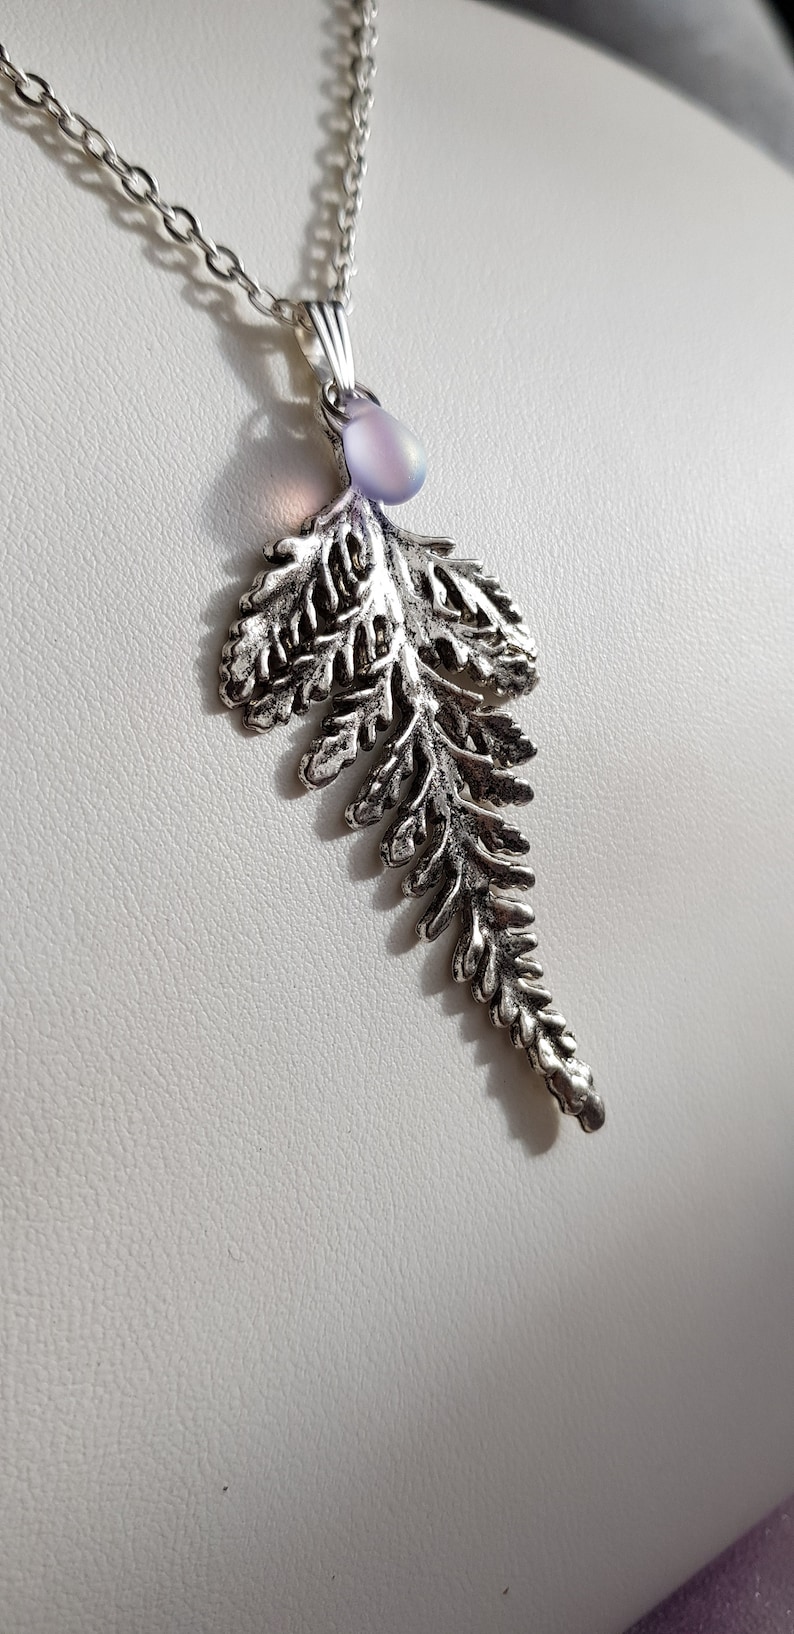 Large Fern Leaf Pendant Necklace, Layering, Choose 16 26 Silver Plate Chain, Extendable, Nature, Foliage, Bracken, Teardrop Frosted Glass image 4